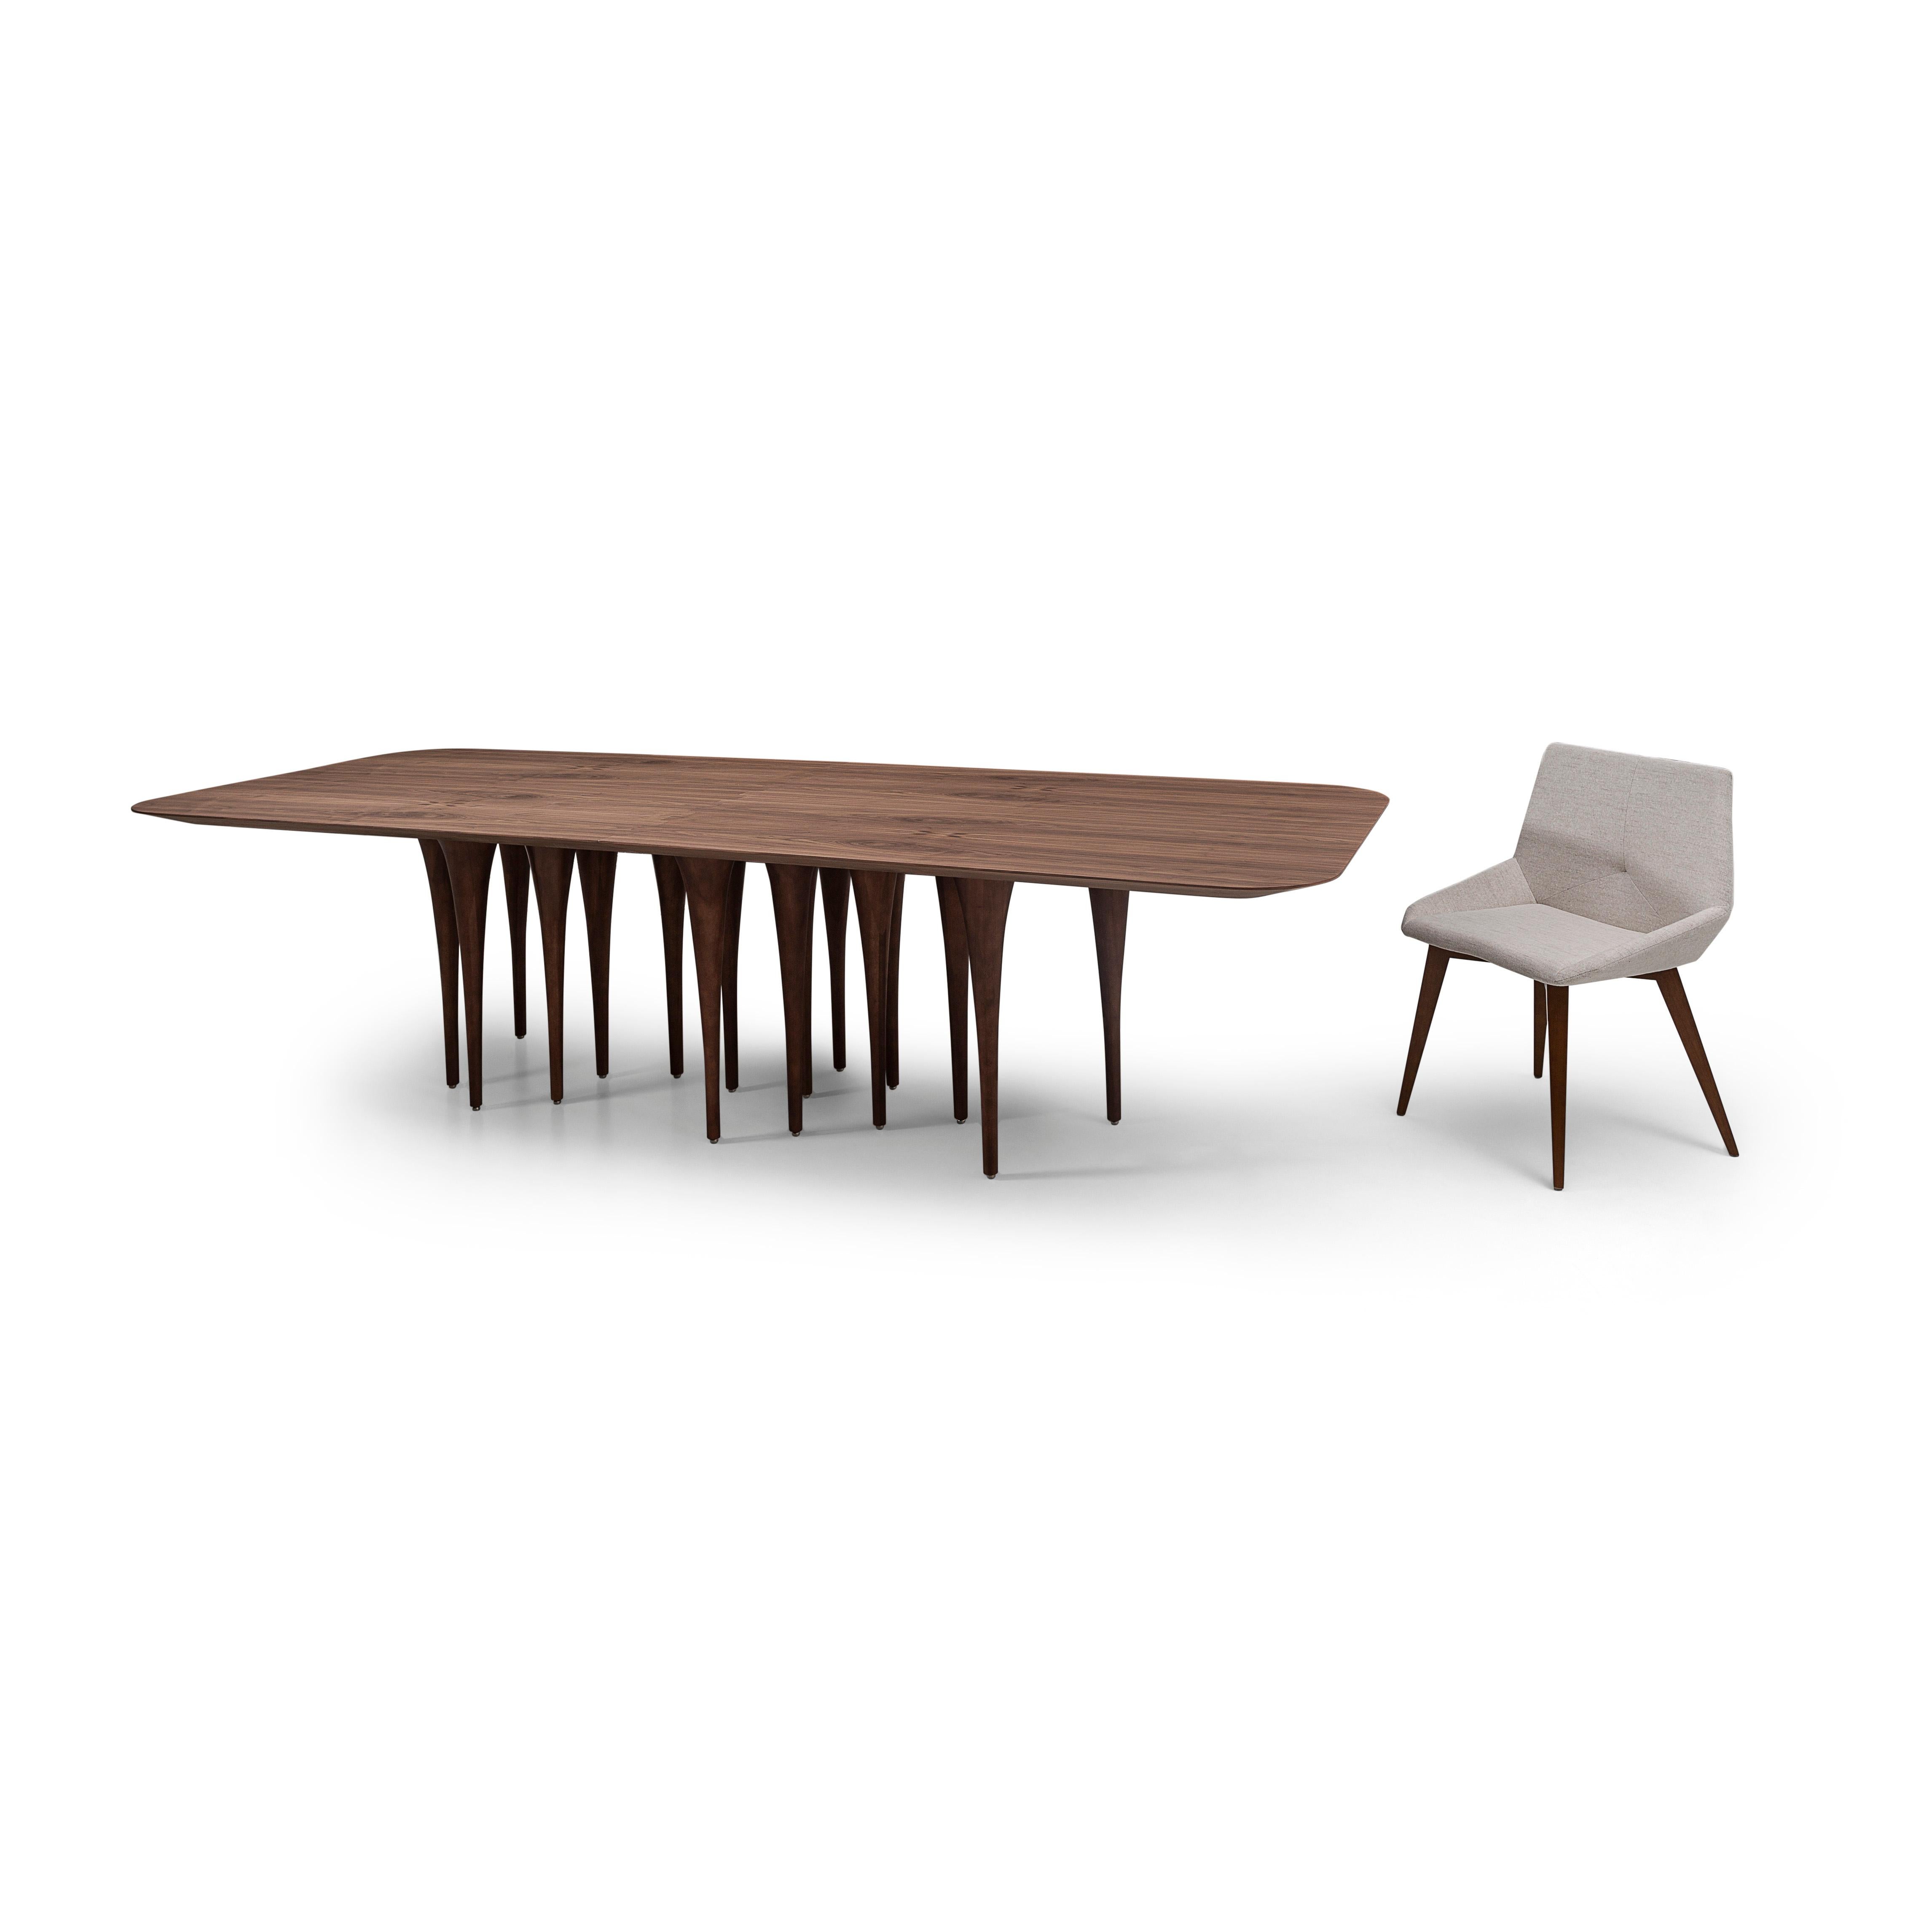 Brazilian Pin Dining Table with Veneered Walnut Wood Finish Table Top and 12 Legs, 98